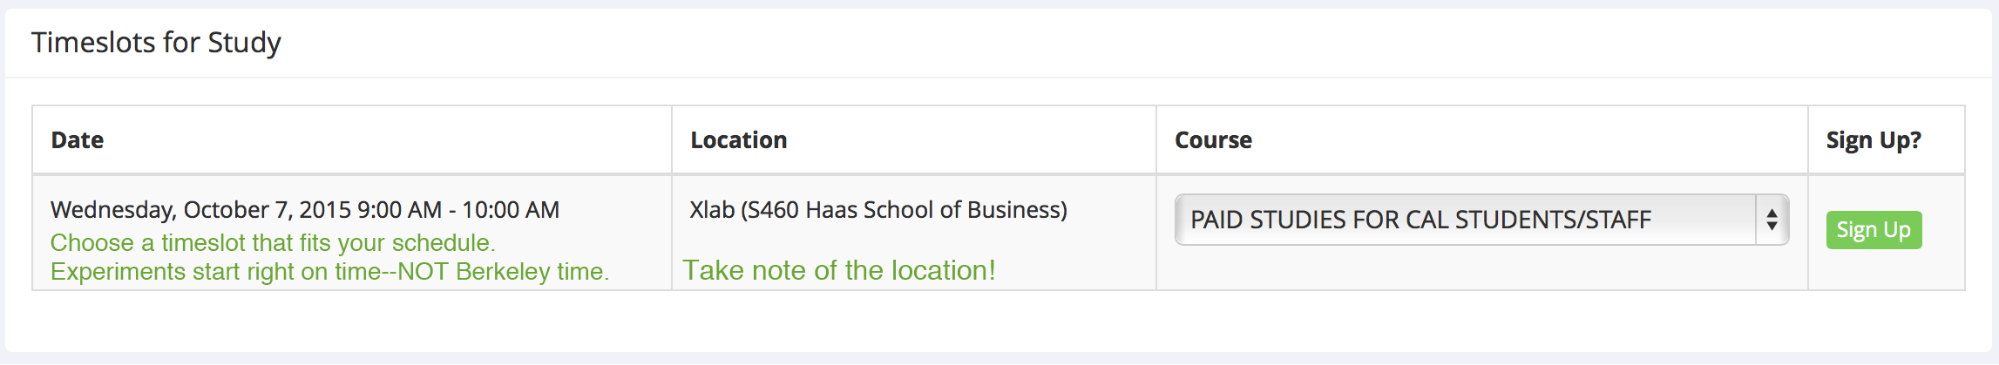 Screenshot of Timeslot for Study page on Sona Systems; tells user when session times are for a particilar study.